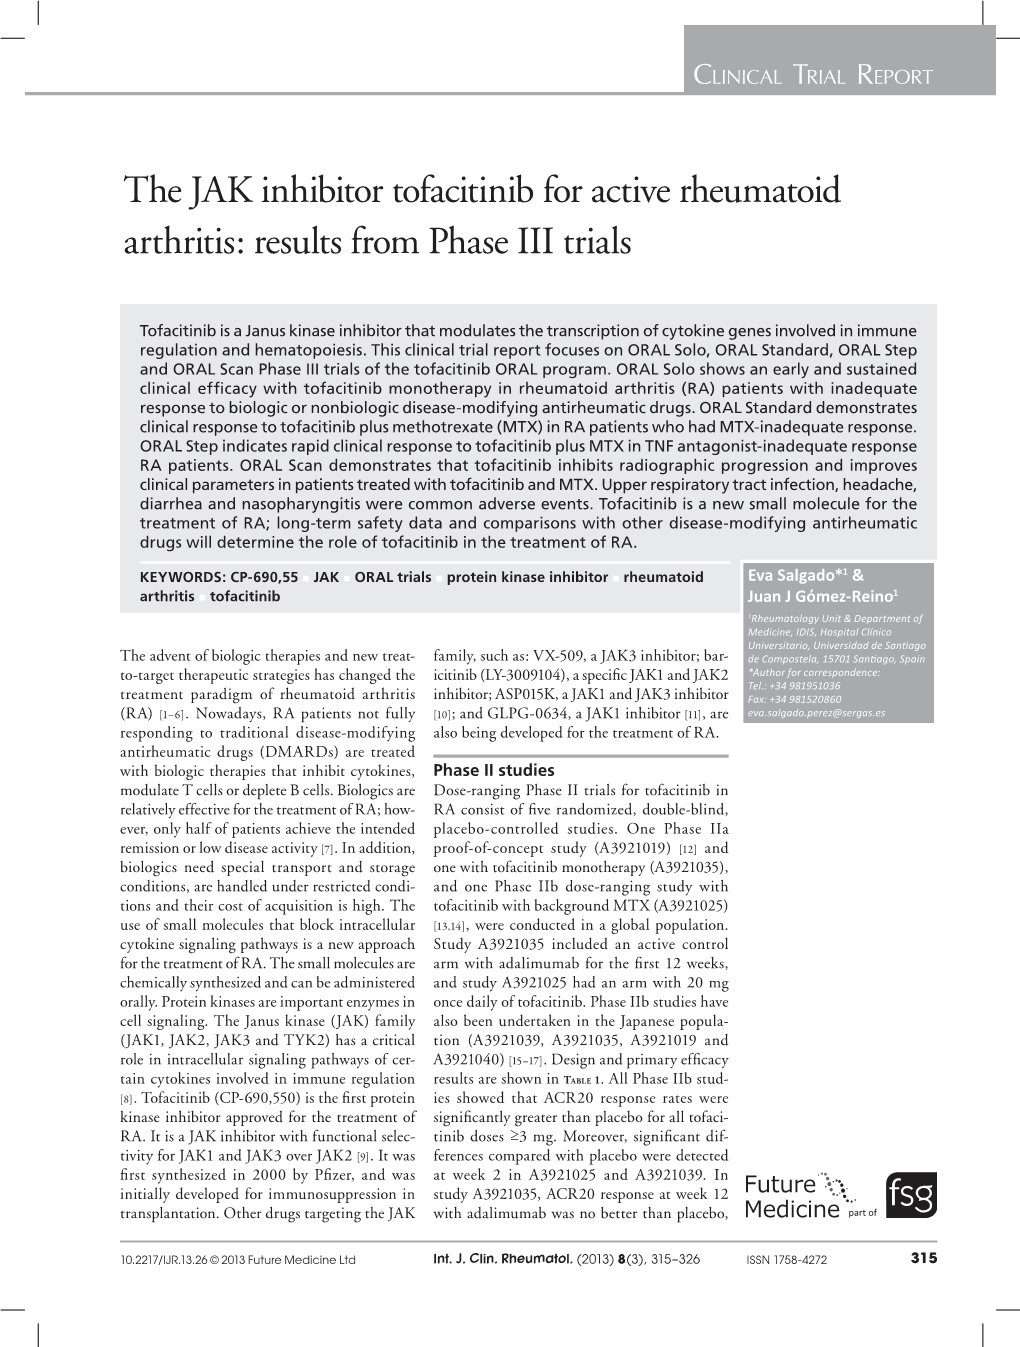 The JAK Inhibitor Tofacitinib for Active Rheumatoid Arthritis: Results from Phase III Trials